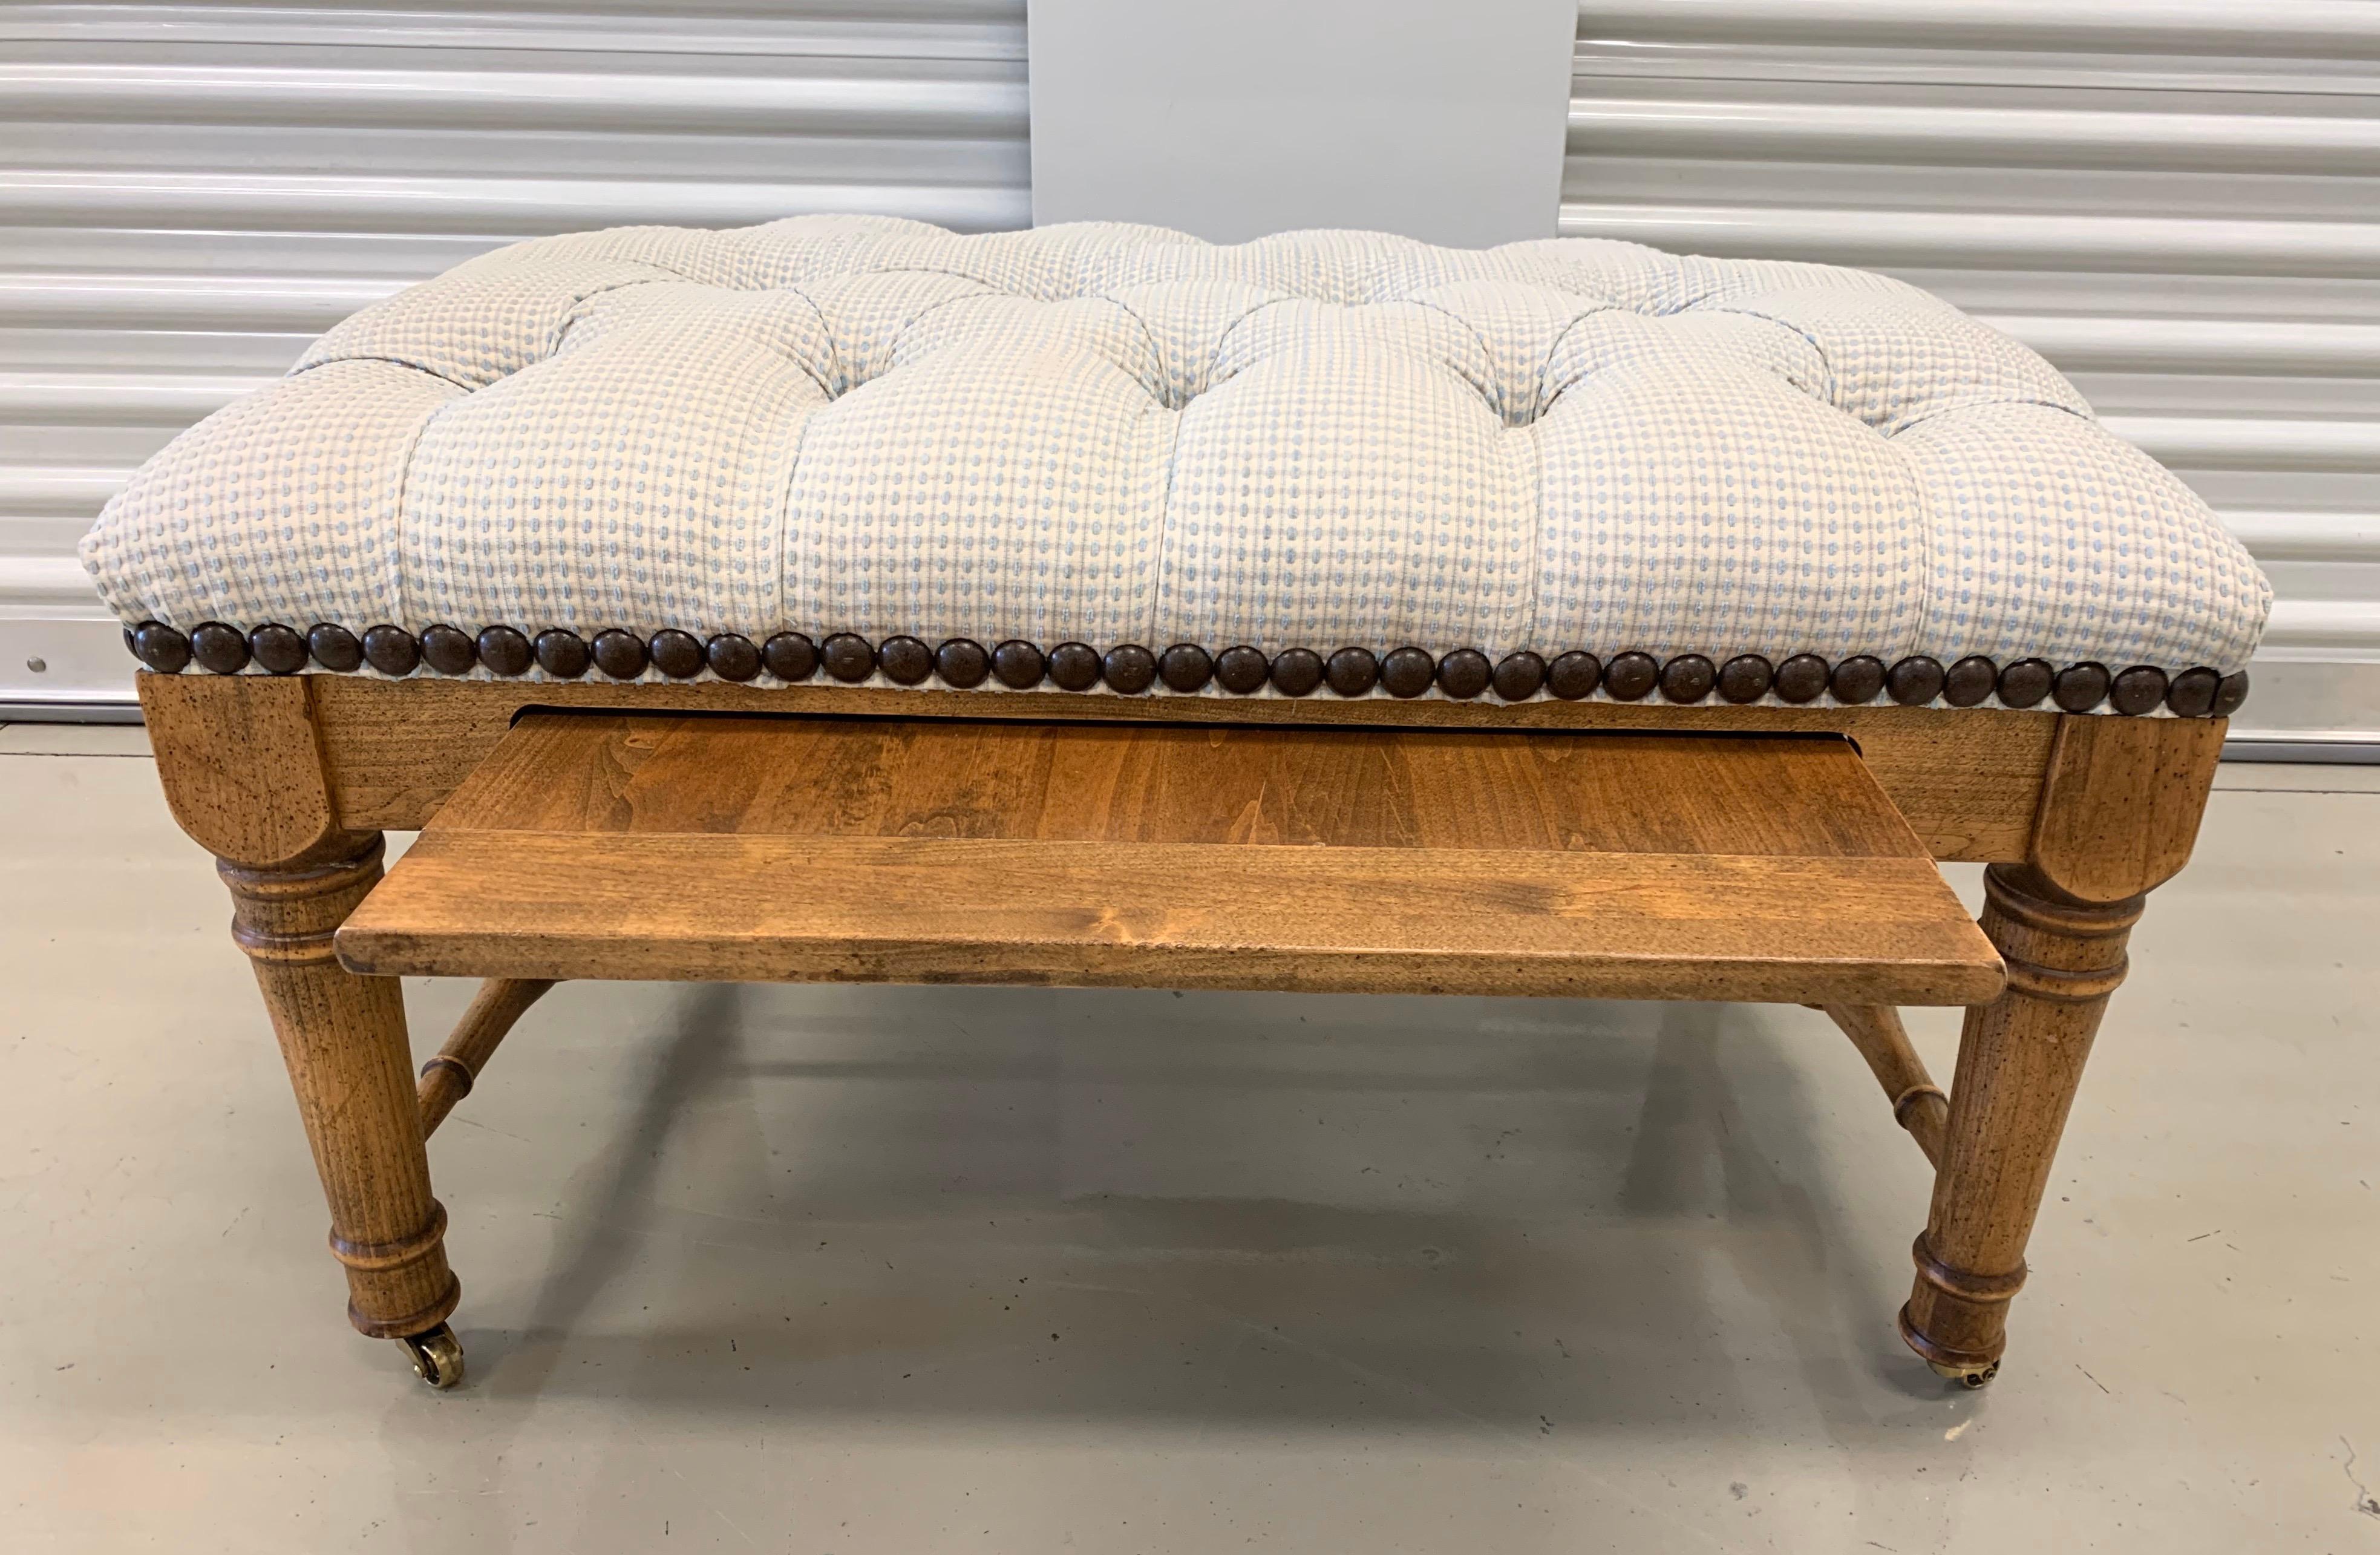 Unusual dual purpose cocktail table with sliding pull out shelf or use is as a bench.
Elegant tufted upholstered top and adorned with nailheads at perimeter.